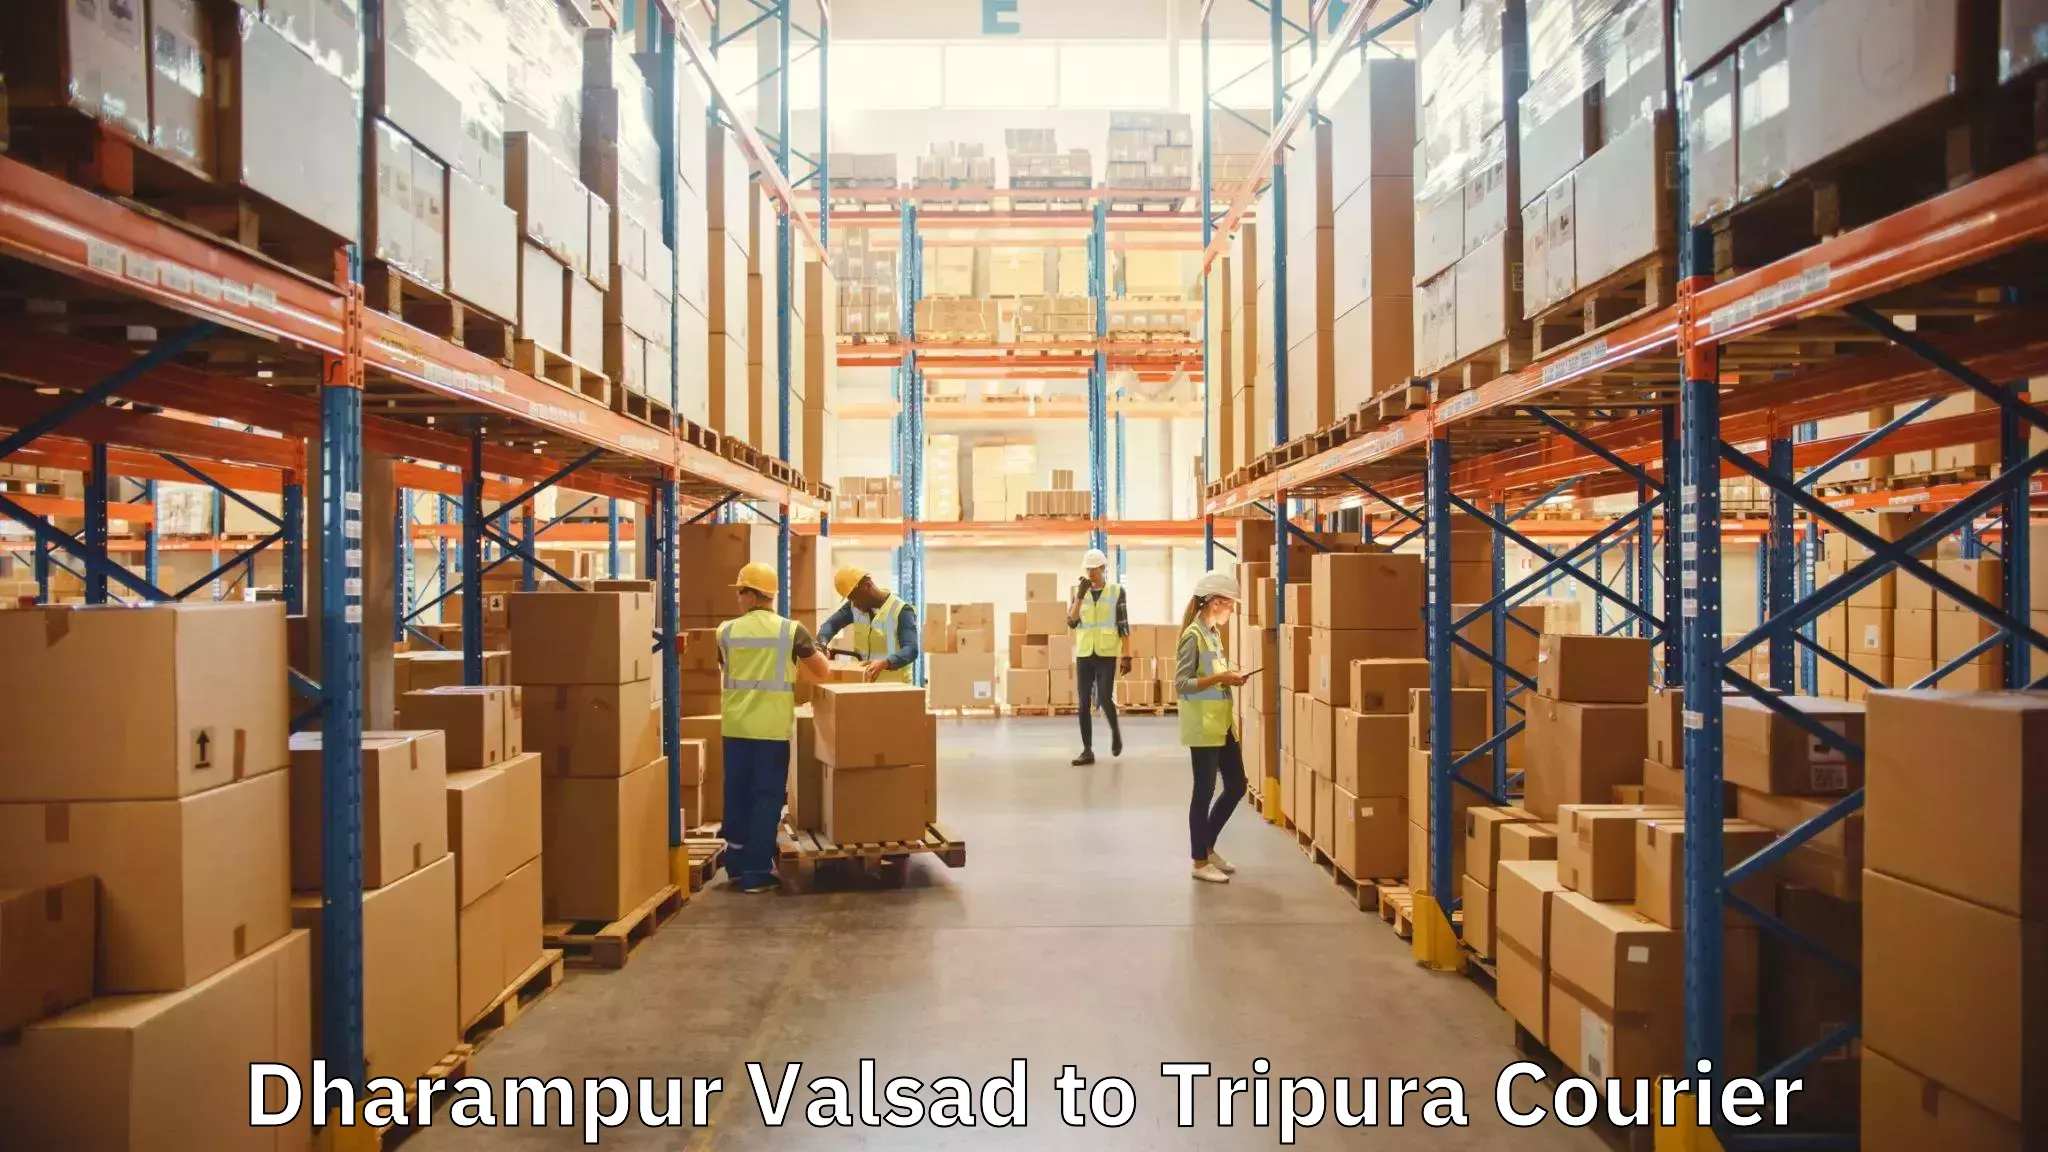 Trusted relocation services Dharampur Valsad to Agartala